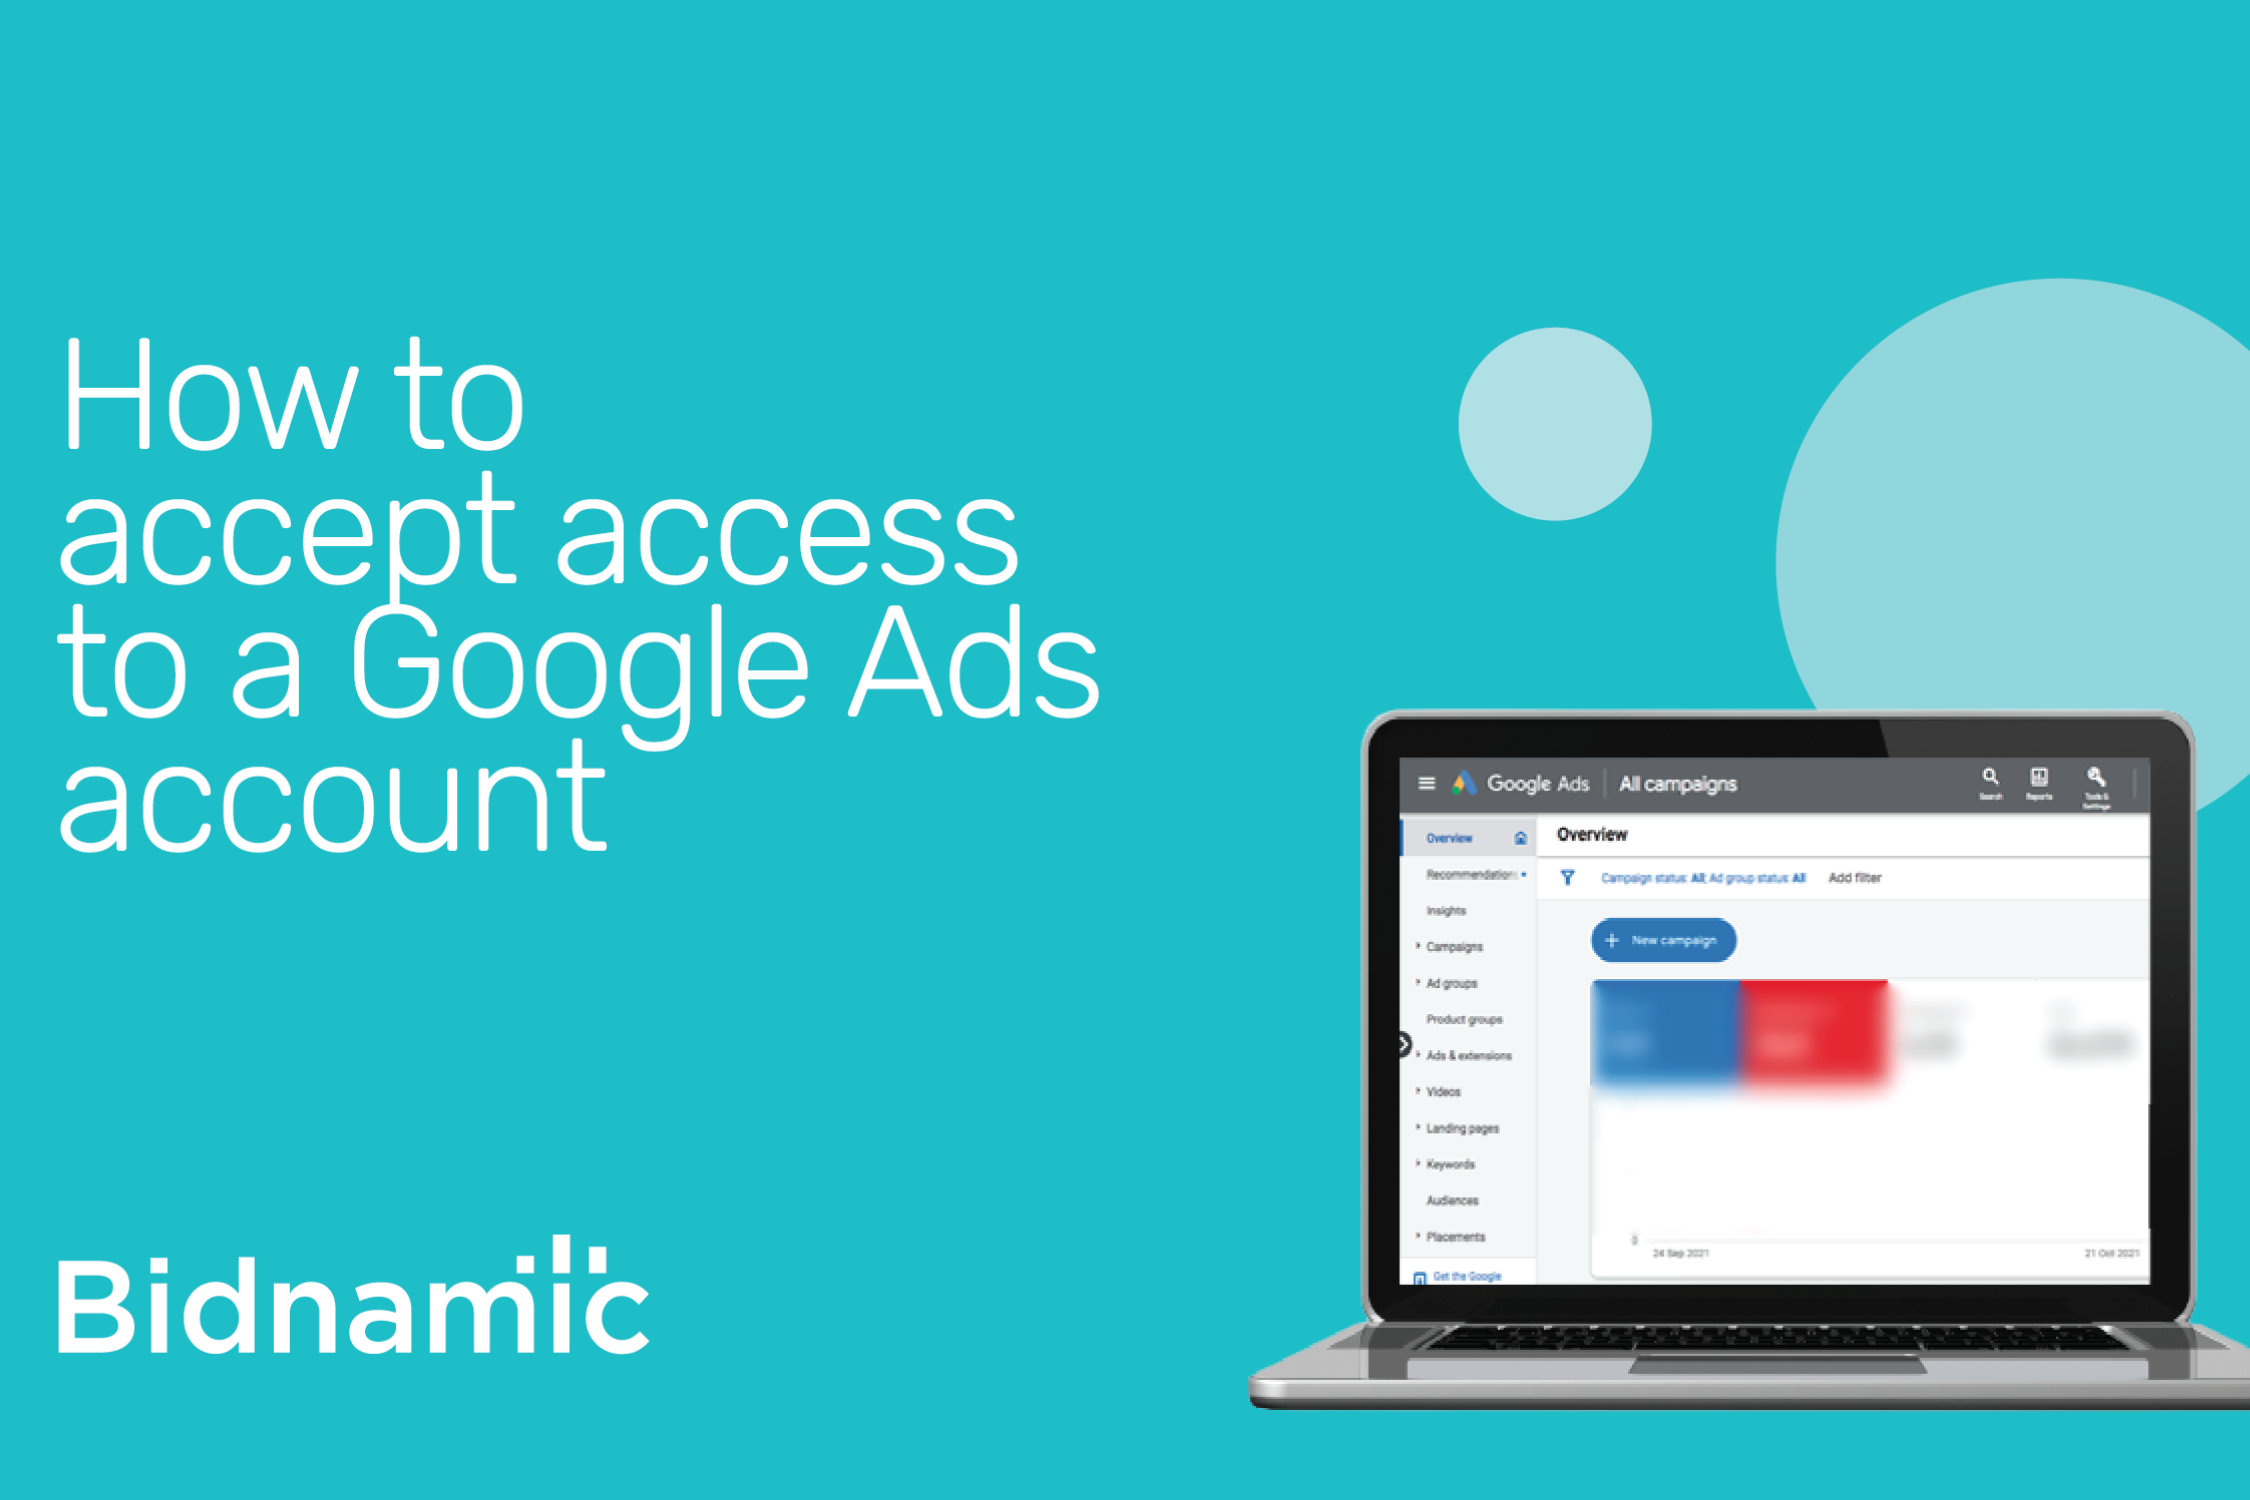 How to accept access to a Google Ads account